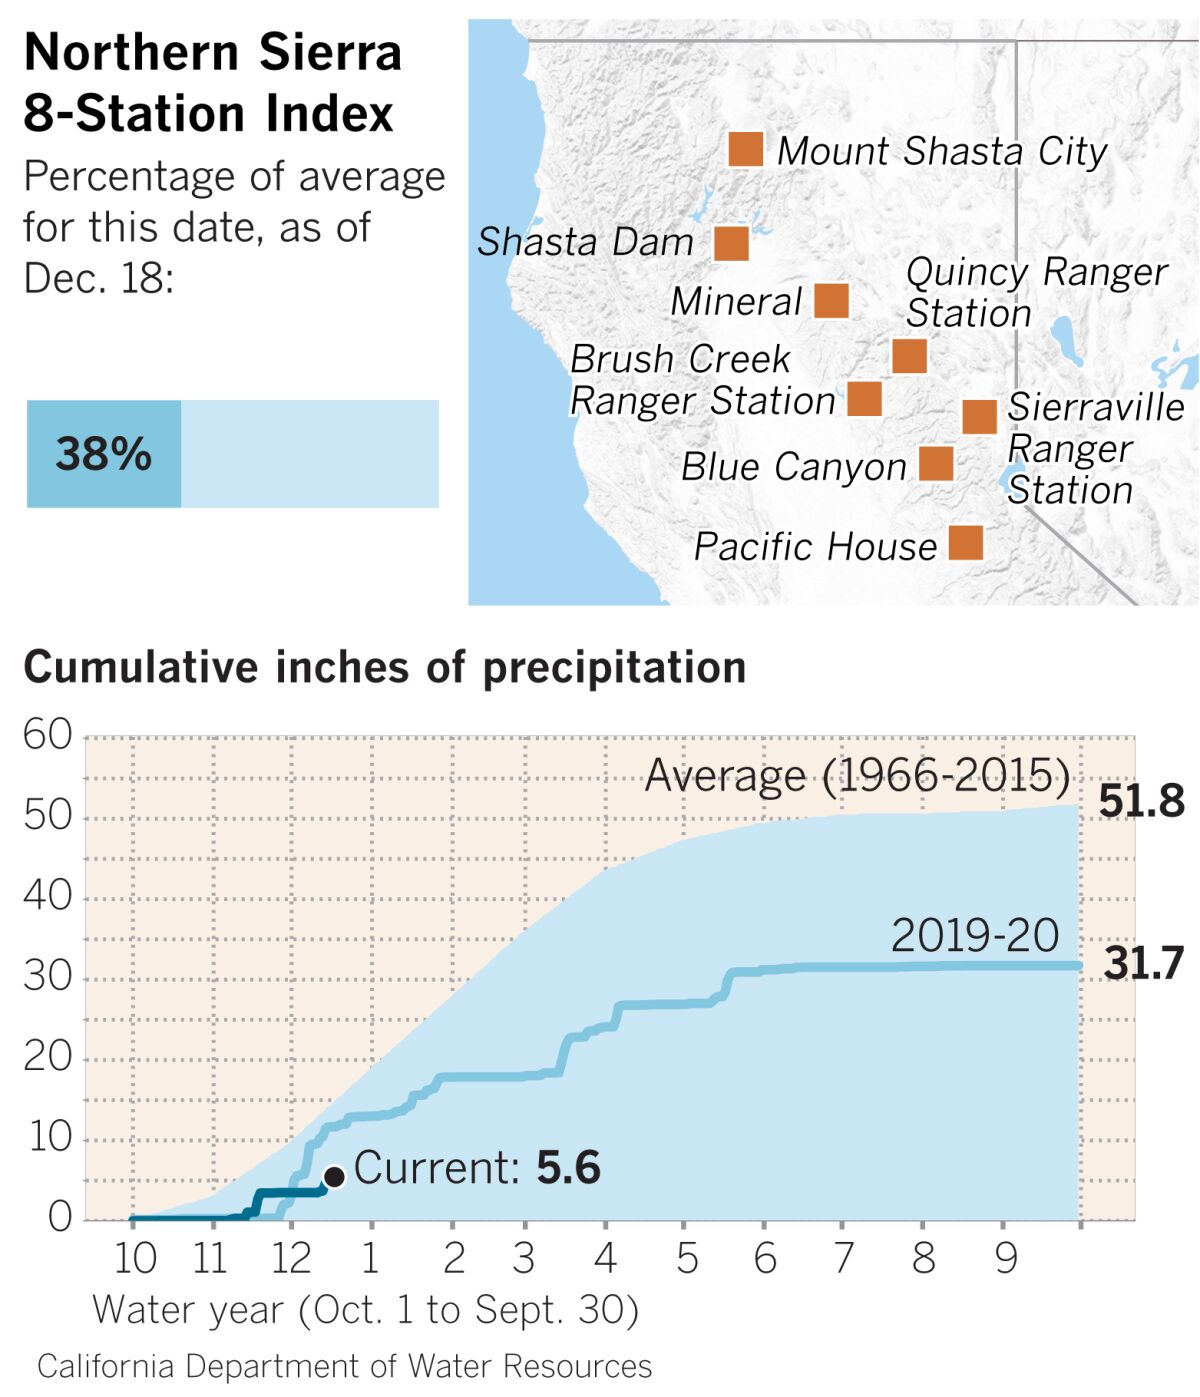 Chart showing 31.7 cumulative inches of precipitation for Northern Sierra in 2019-20, below average of 51.8